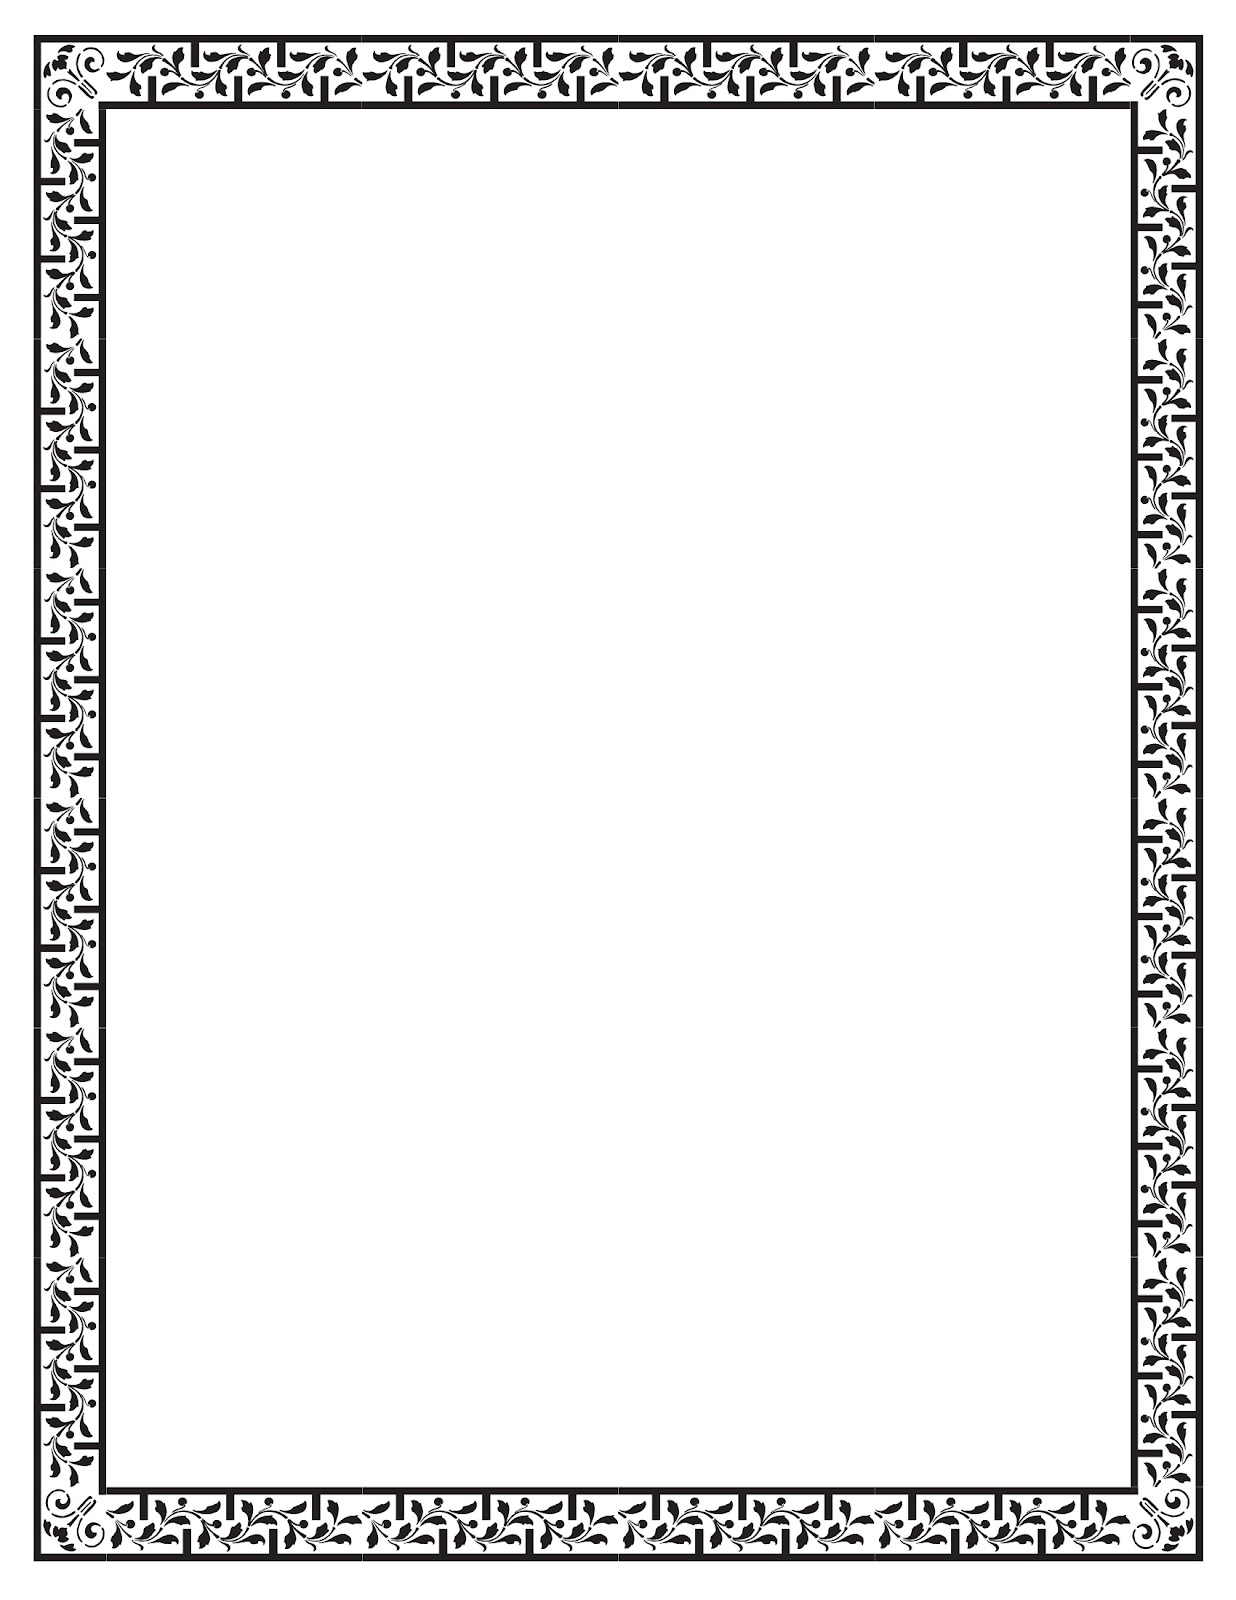 clipart picture frames free - photo #16